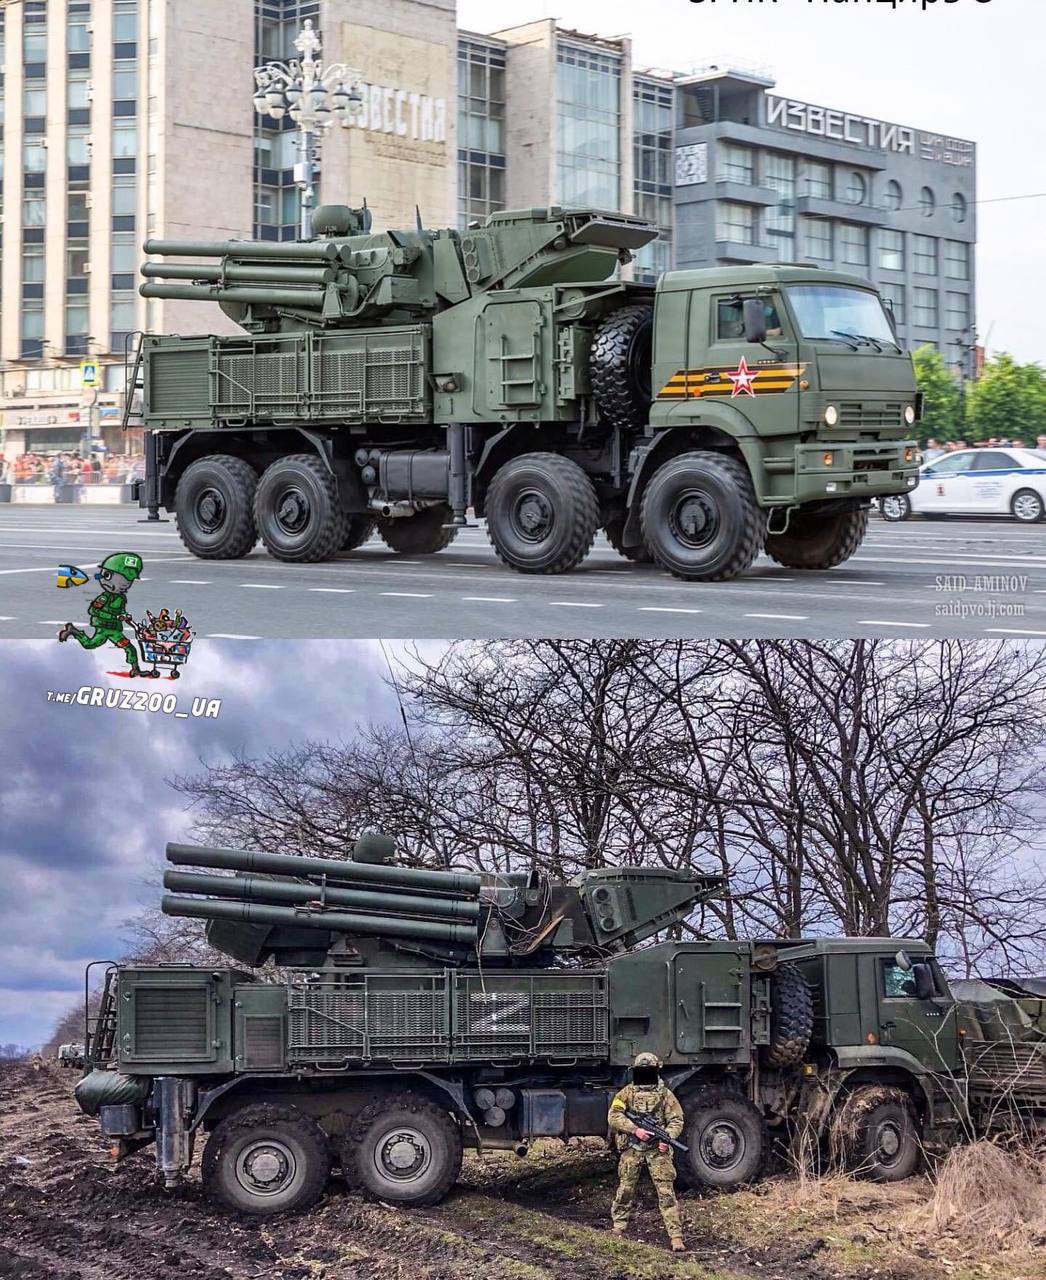 Russia’s Latest Heavy Armor Before and After Coming to Ukraine (Photo Compilation), Defense Express, war in Ukraine, Russian-Ukrainian war